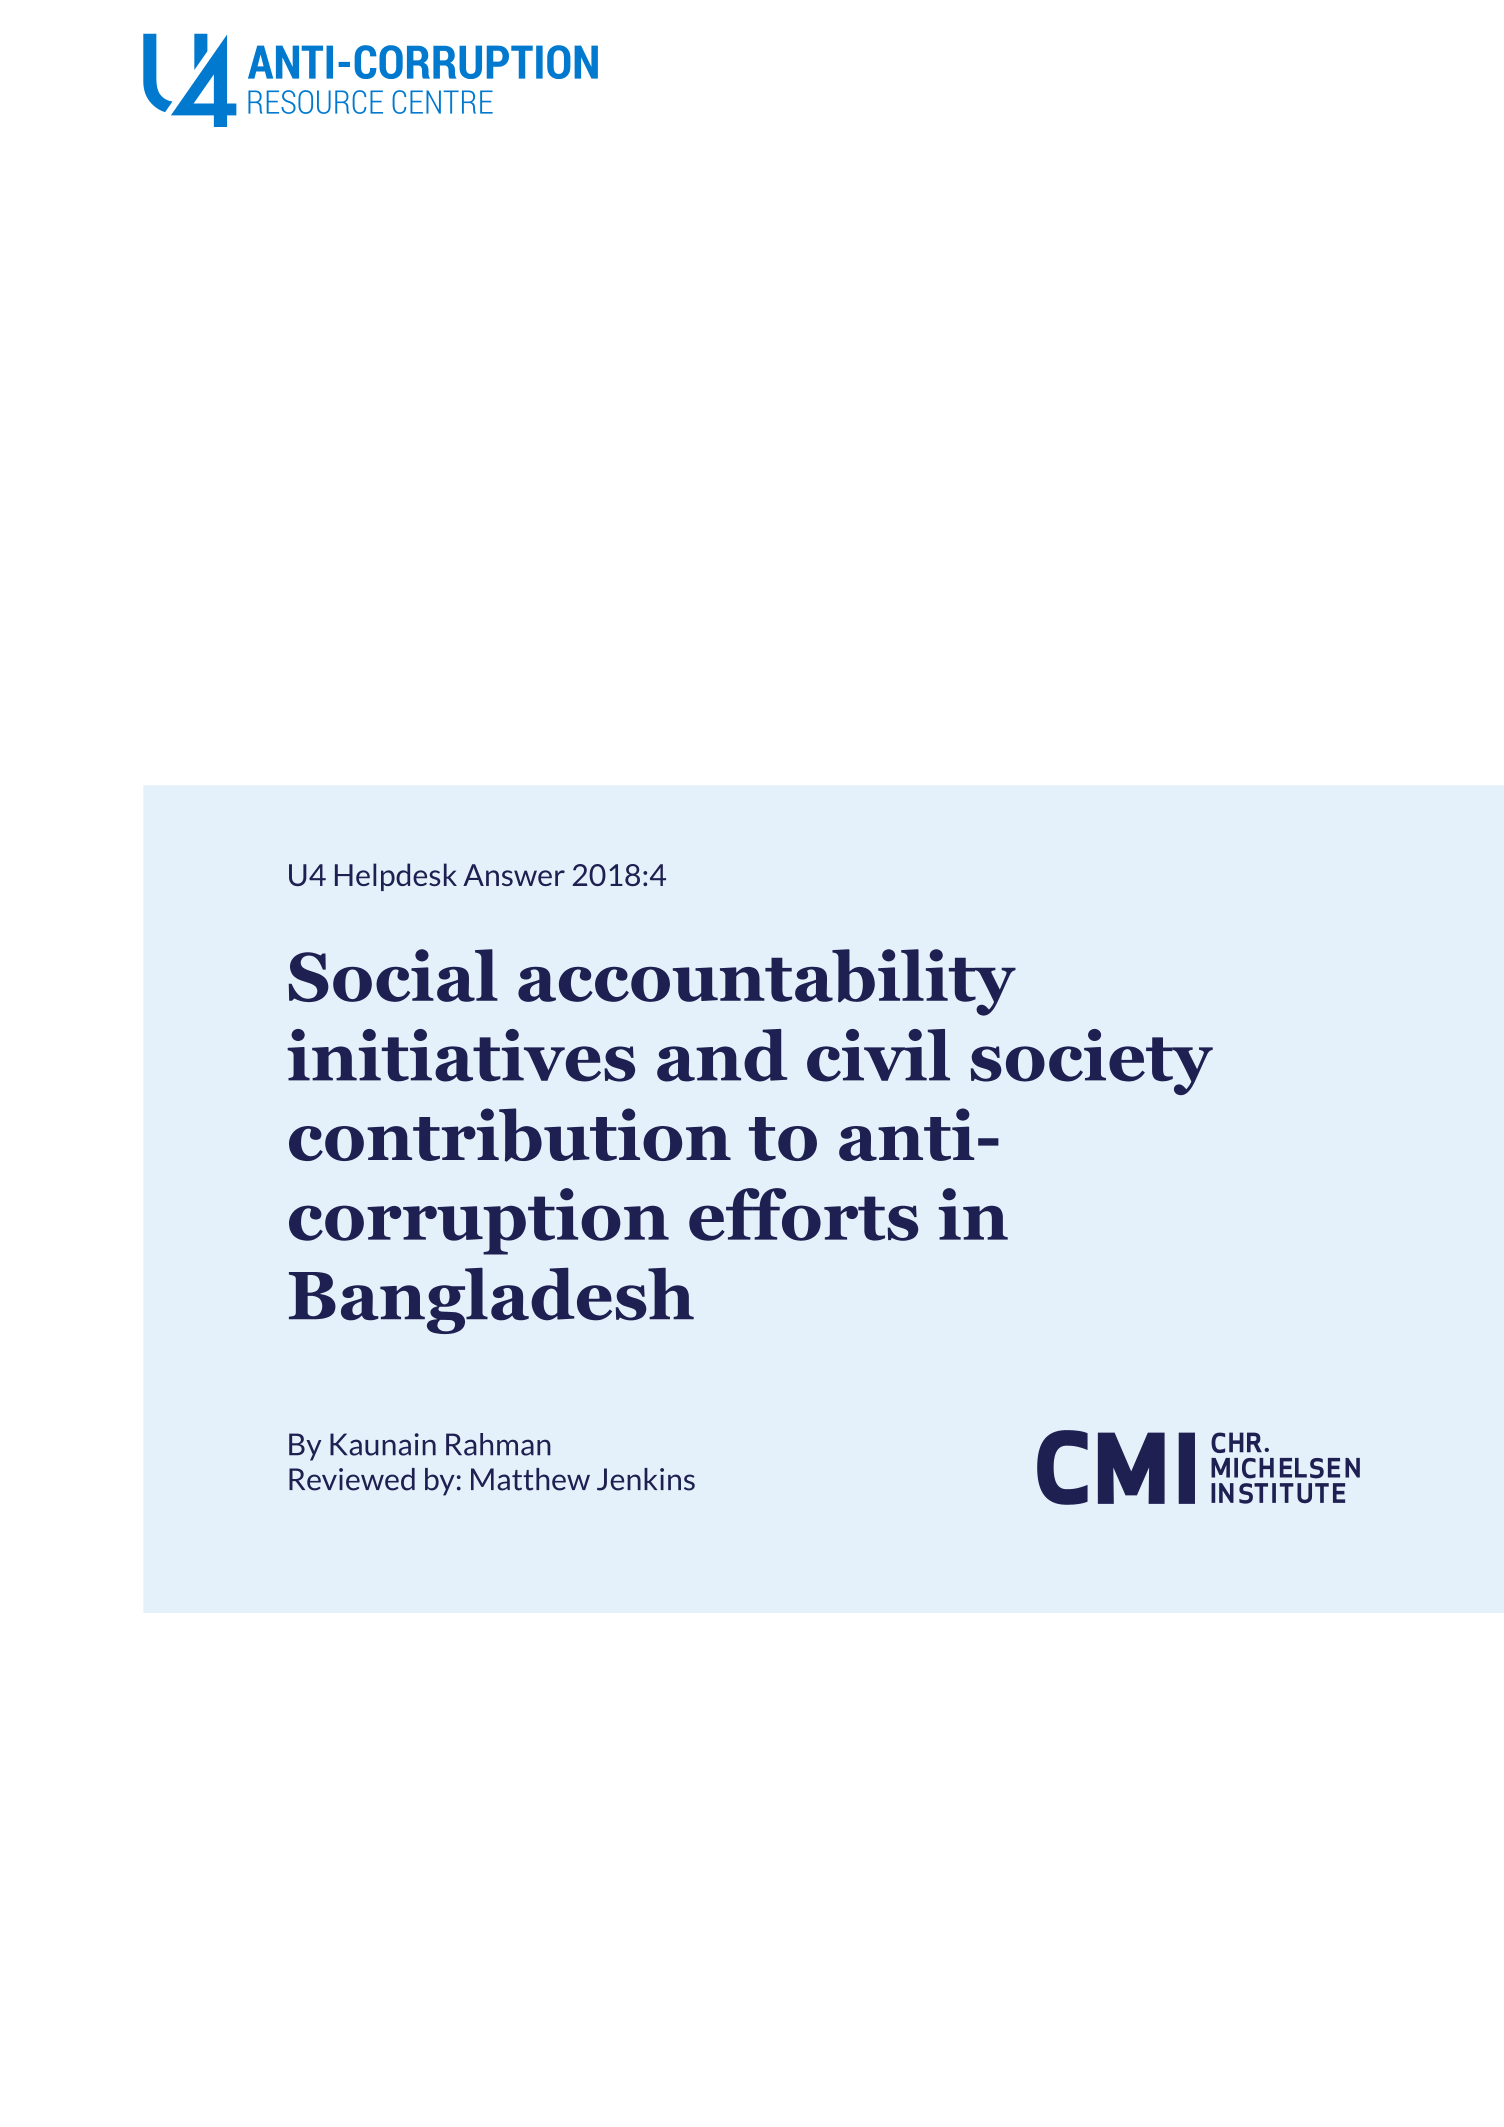 Social accountability initiatives and civil society contribution to anti-corruption efforts in Bangladesh  